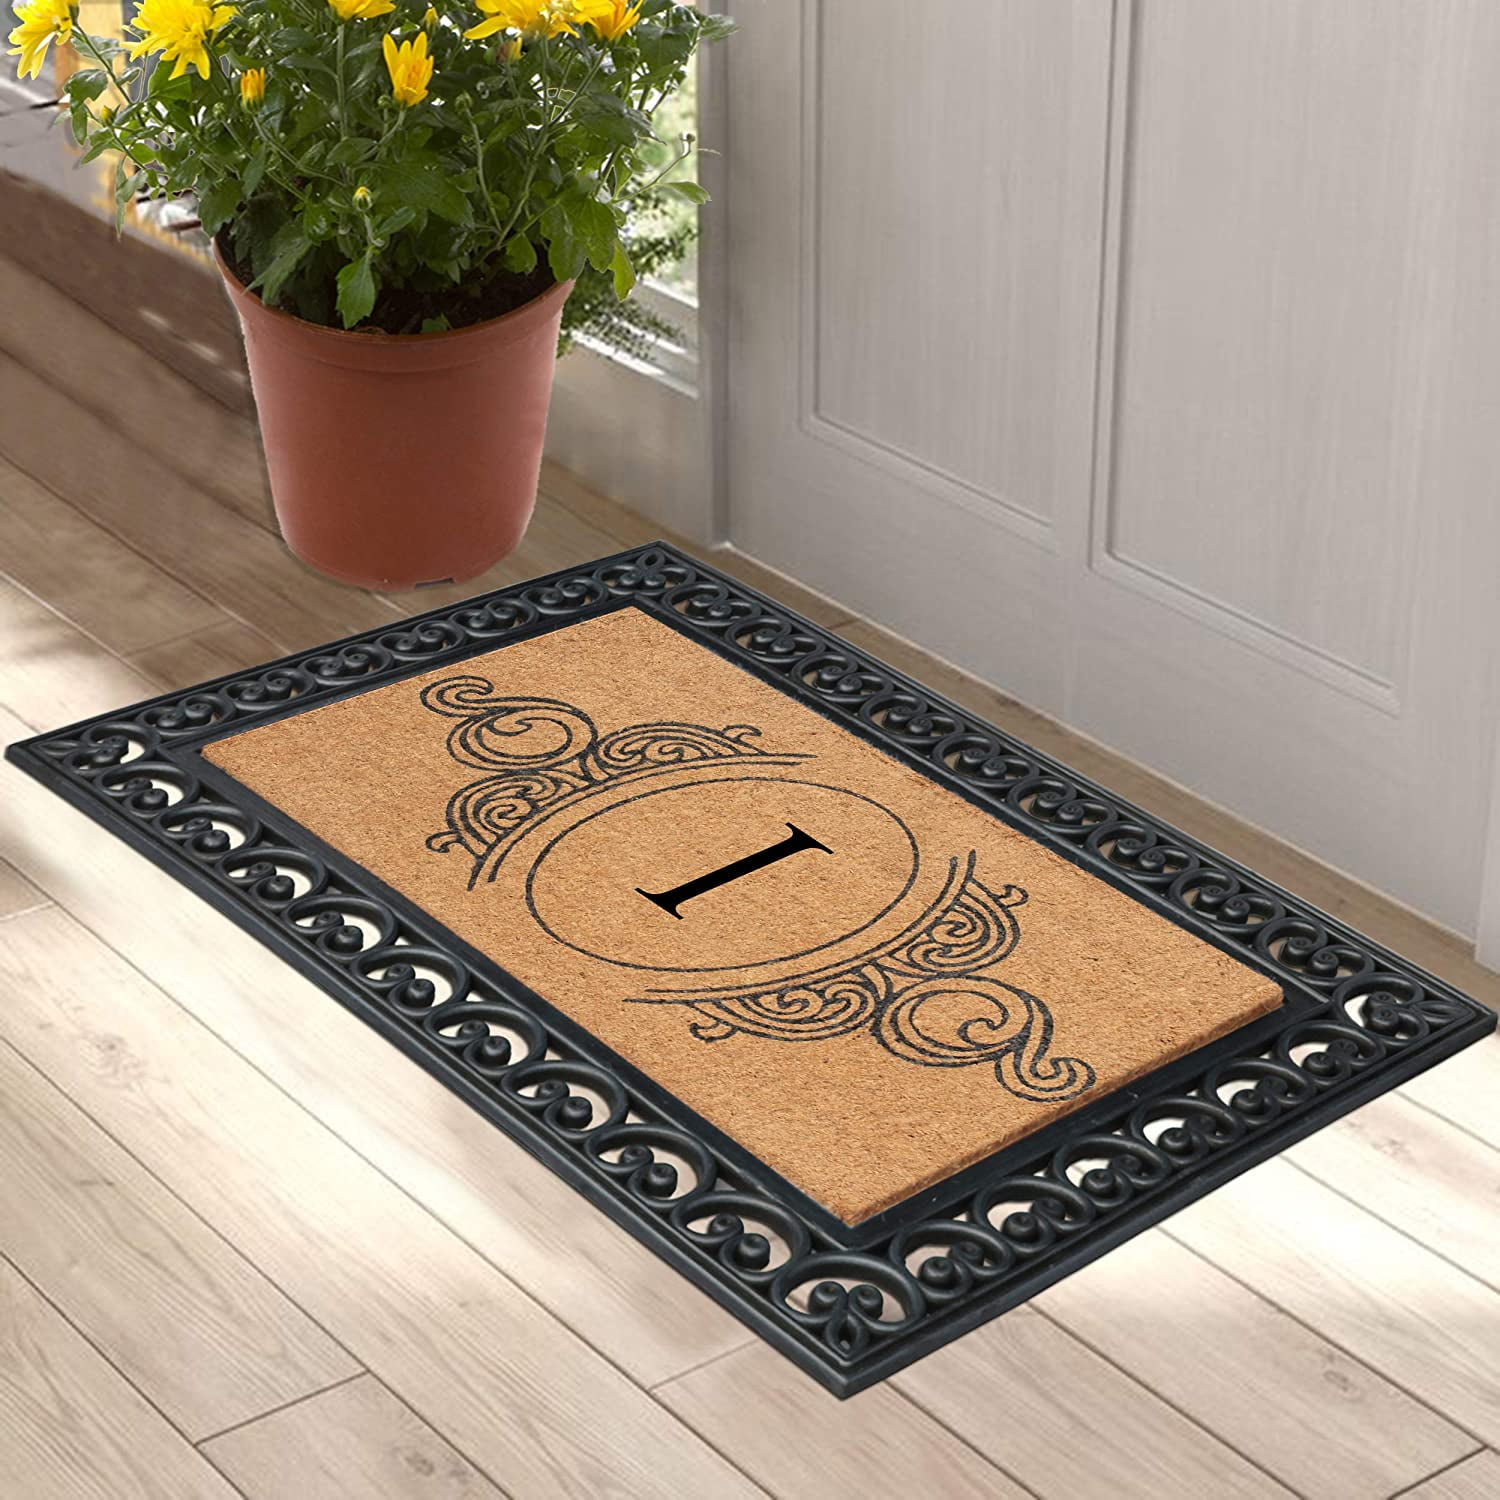 Lika A1hc Natural Coir & Rubber Hand Flocked Large Door Mat 30x60 Inches Thick Durable Doormats for Entrance Heavy Duty, Thin Profile Front Door Mat